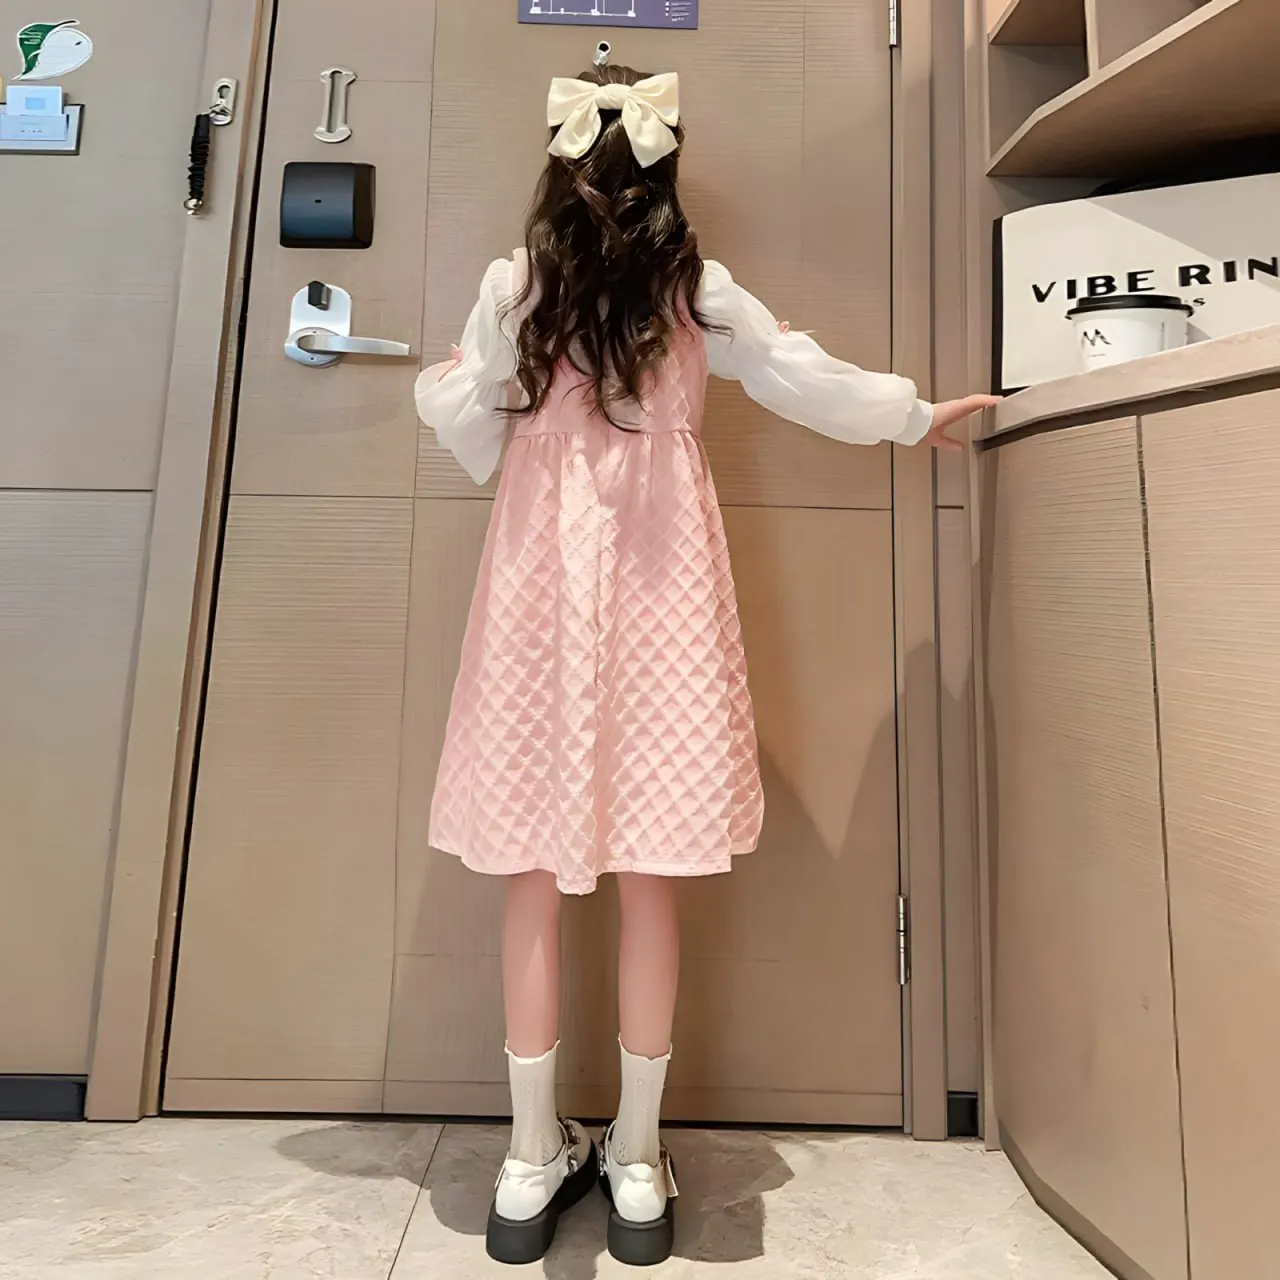 Wholesale Kids Summer Dresses Patterned Girls Dress with Long Sleeve Cotton Material with Ruffle Baby Girl Dress 4-5 years old